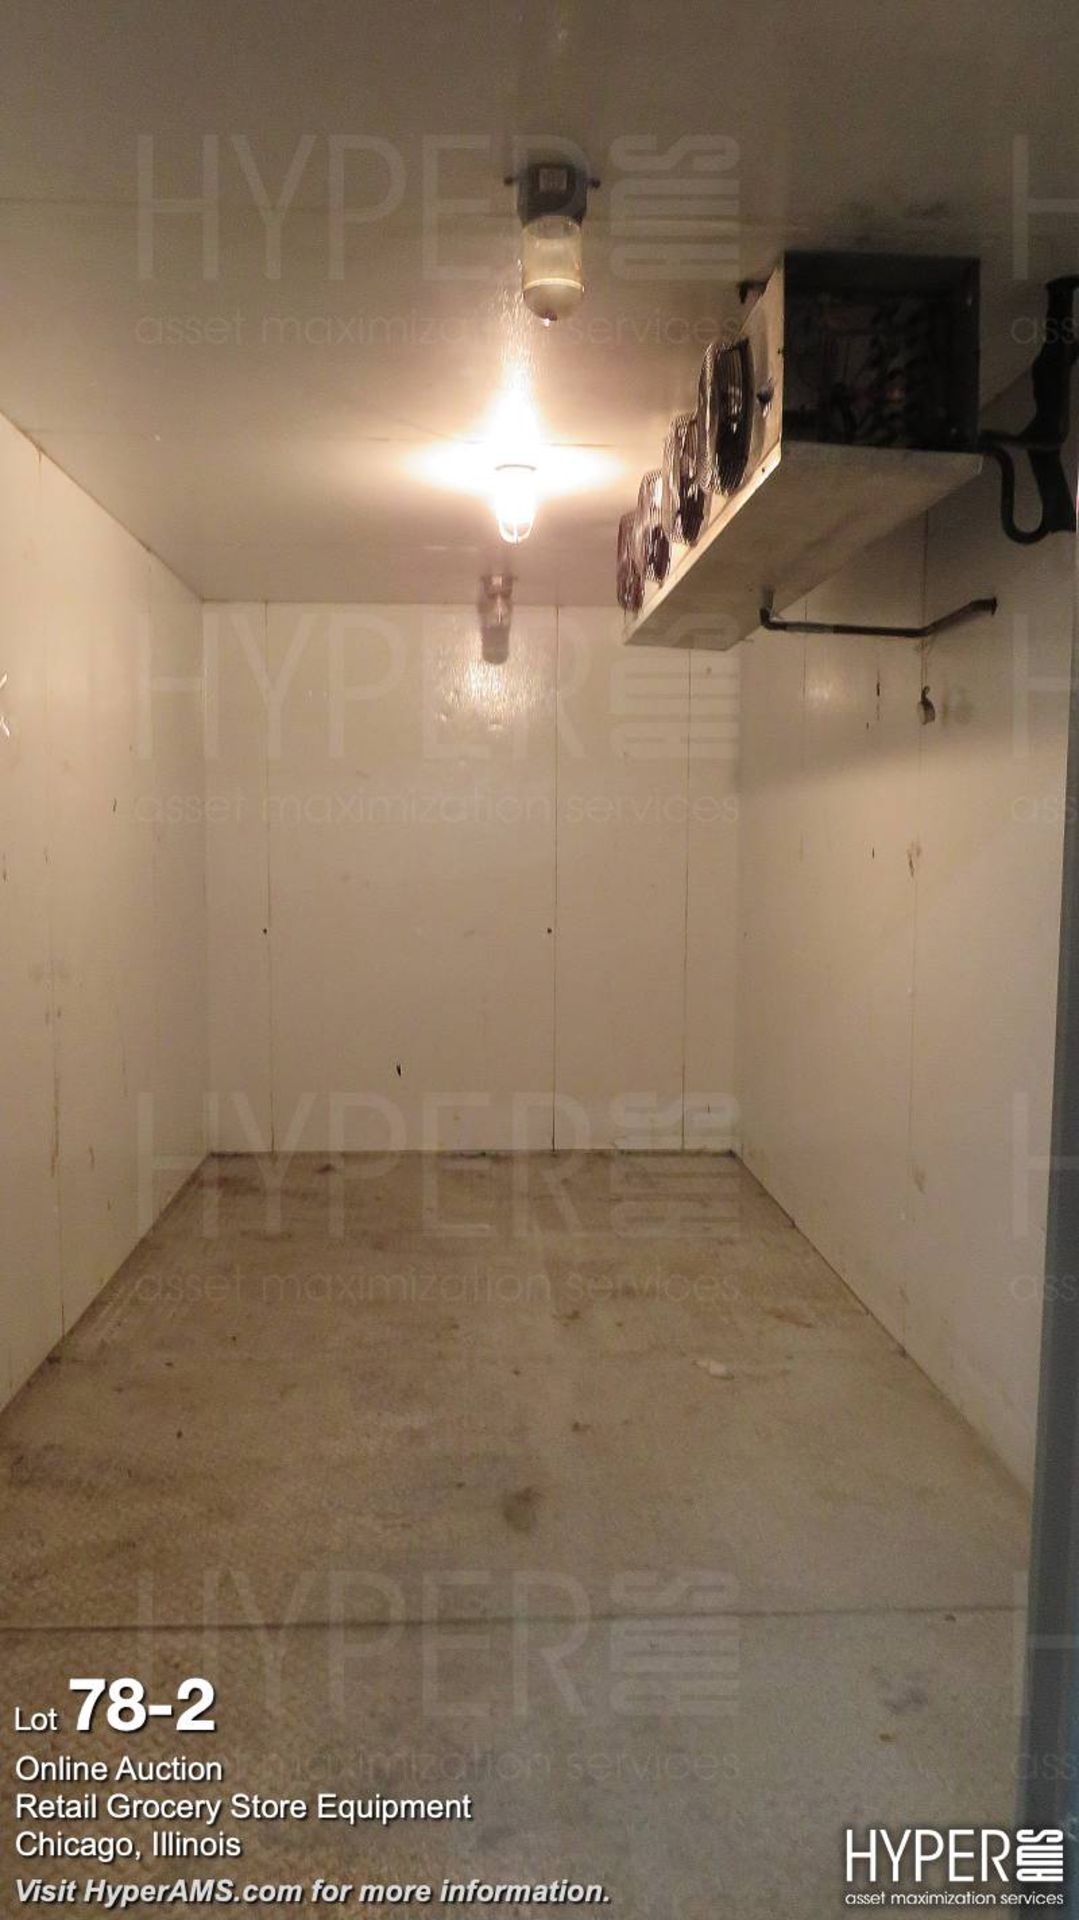 Tyler Walk In Cooler (10ftX8ftX100")(39" Door) , sn 9971348-3D1 - No Compression Unit See Lot #95 - Image 2 of 3